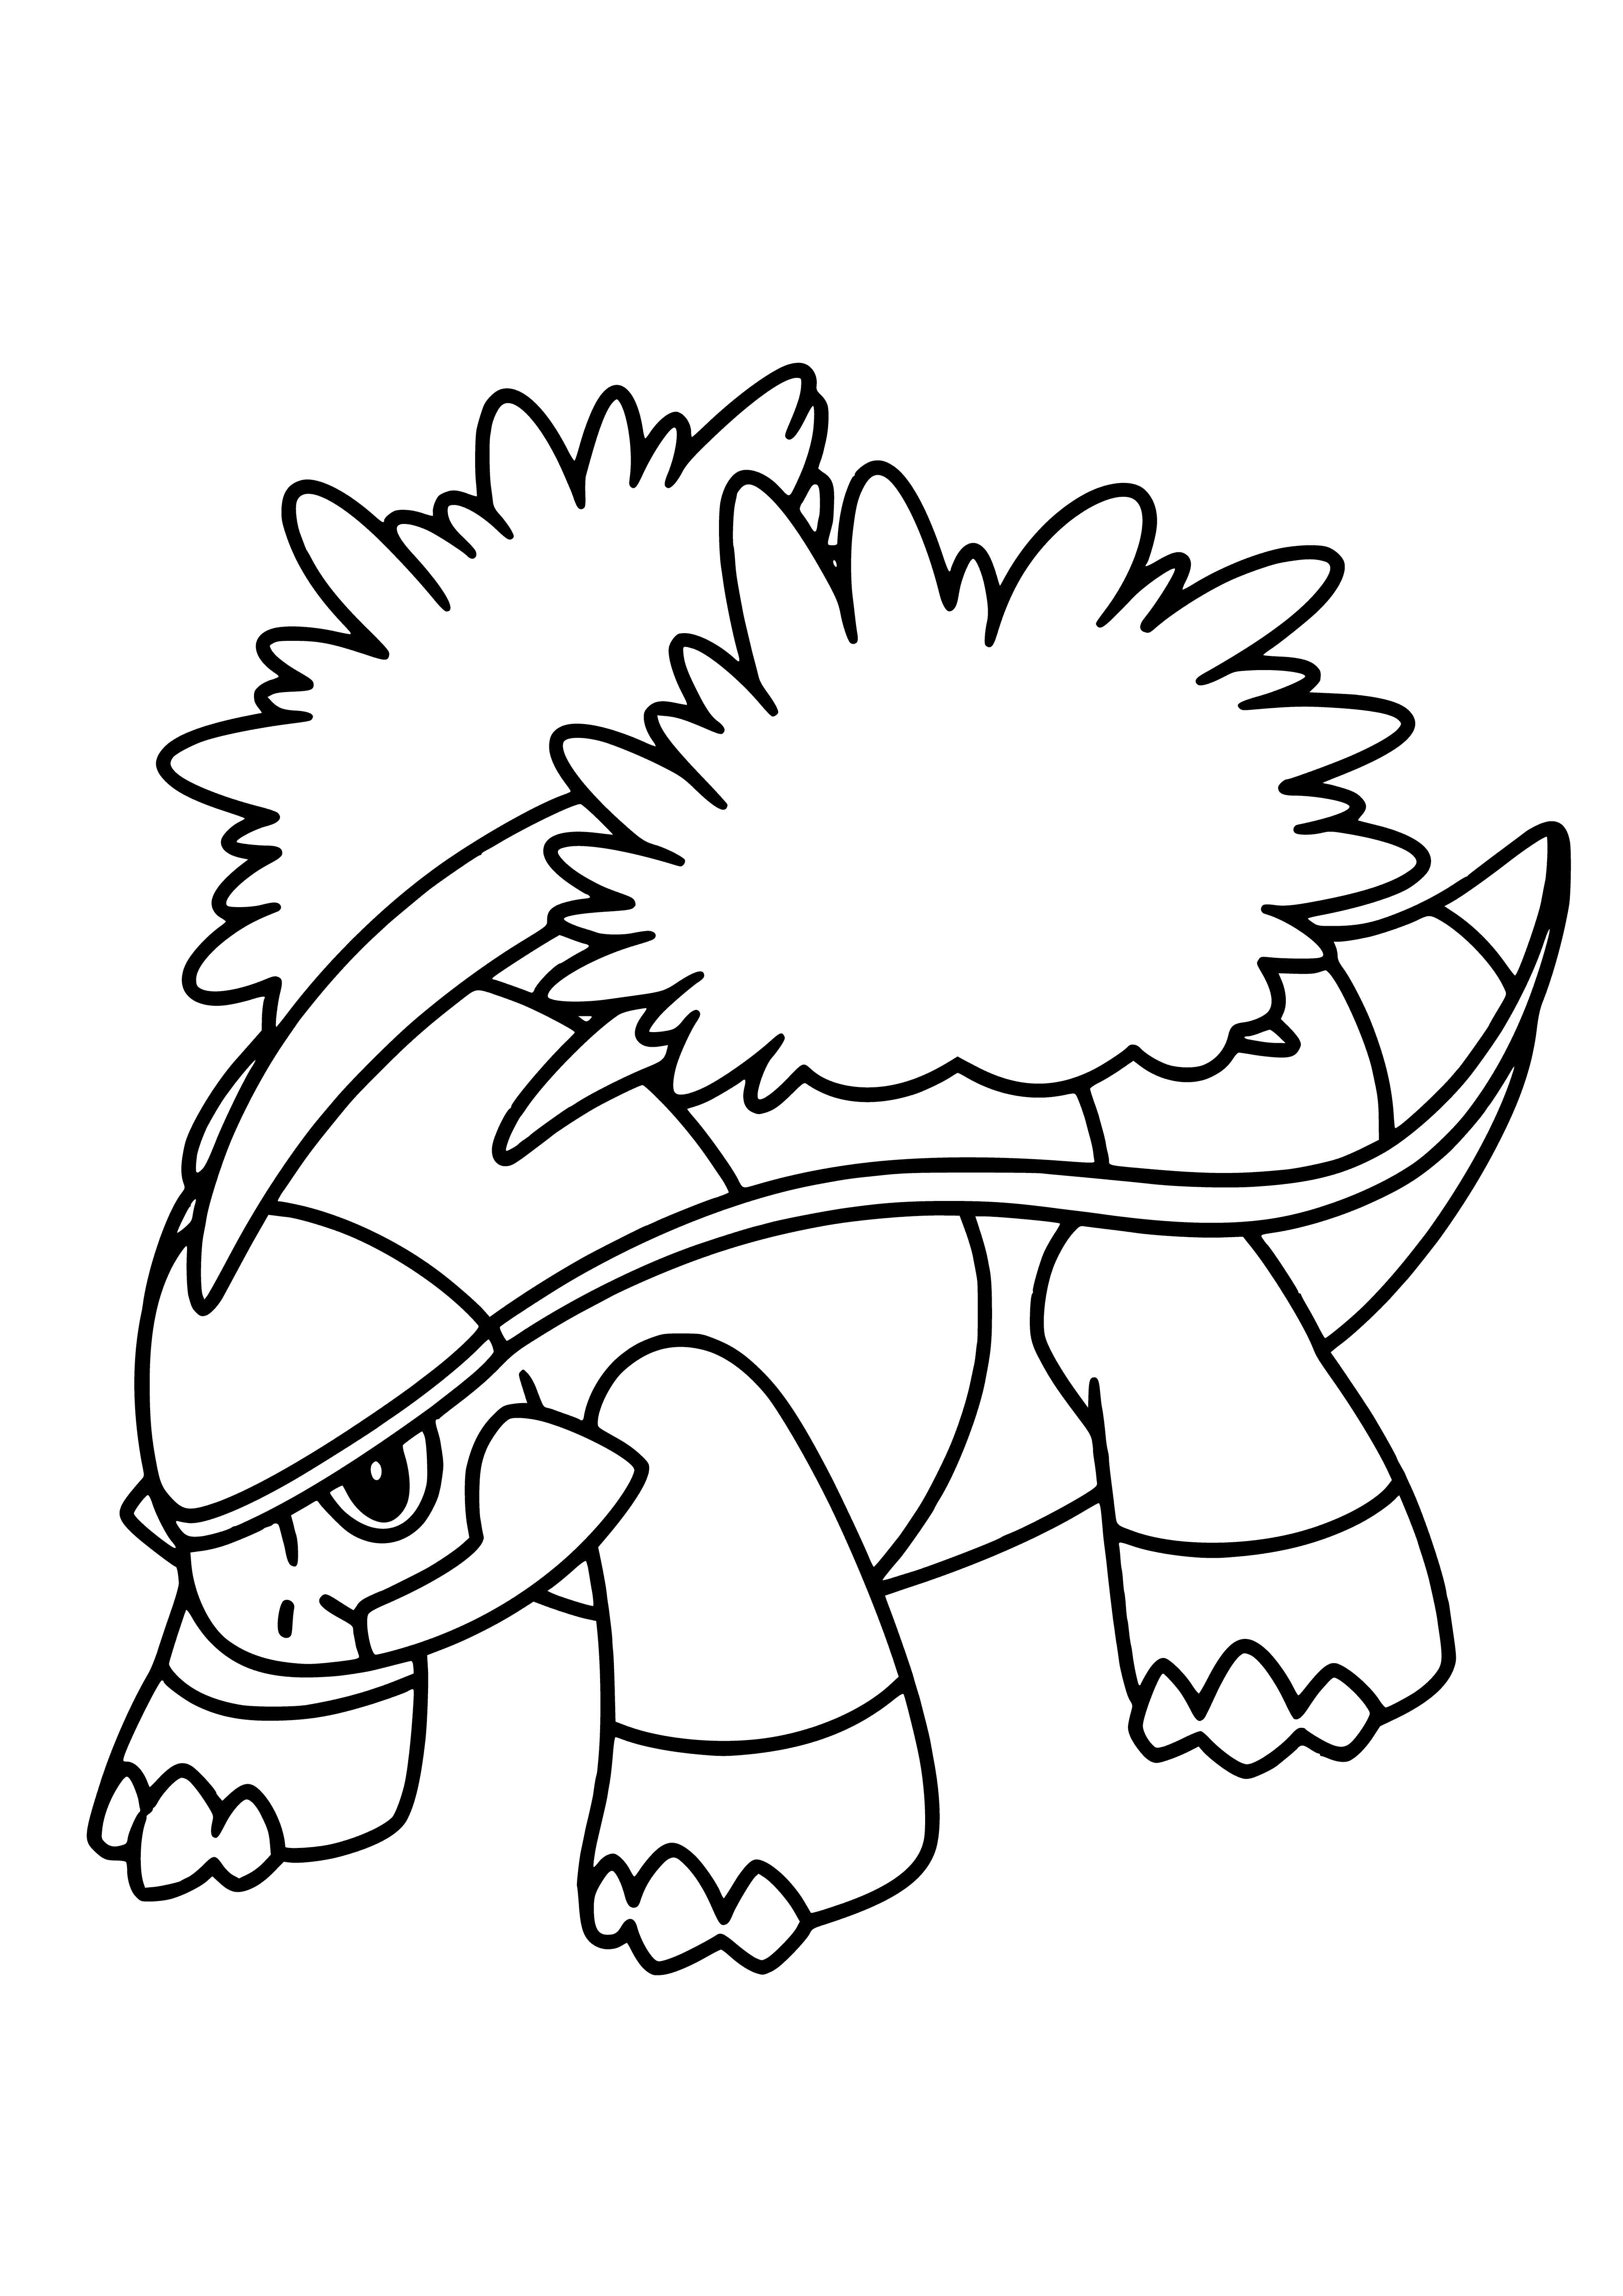 Pokemon Grotl (Grotle) coloring page